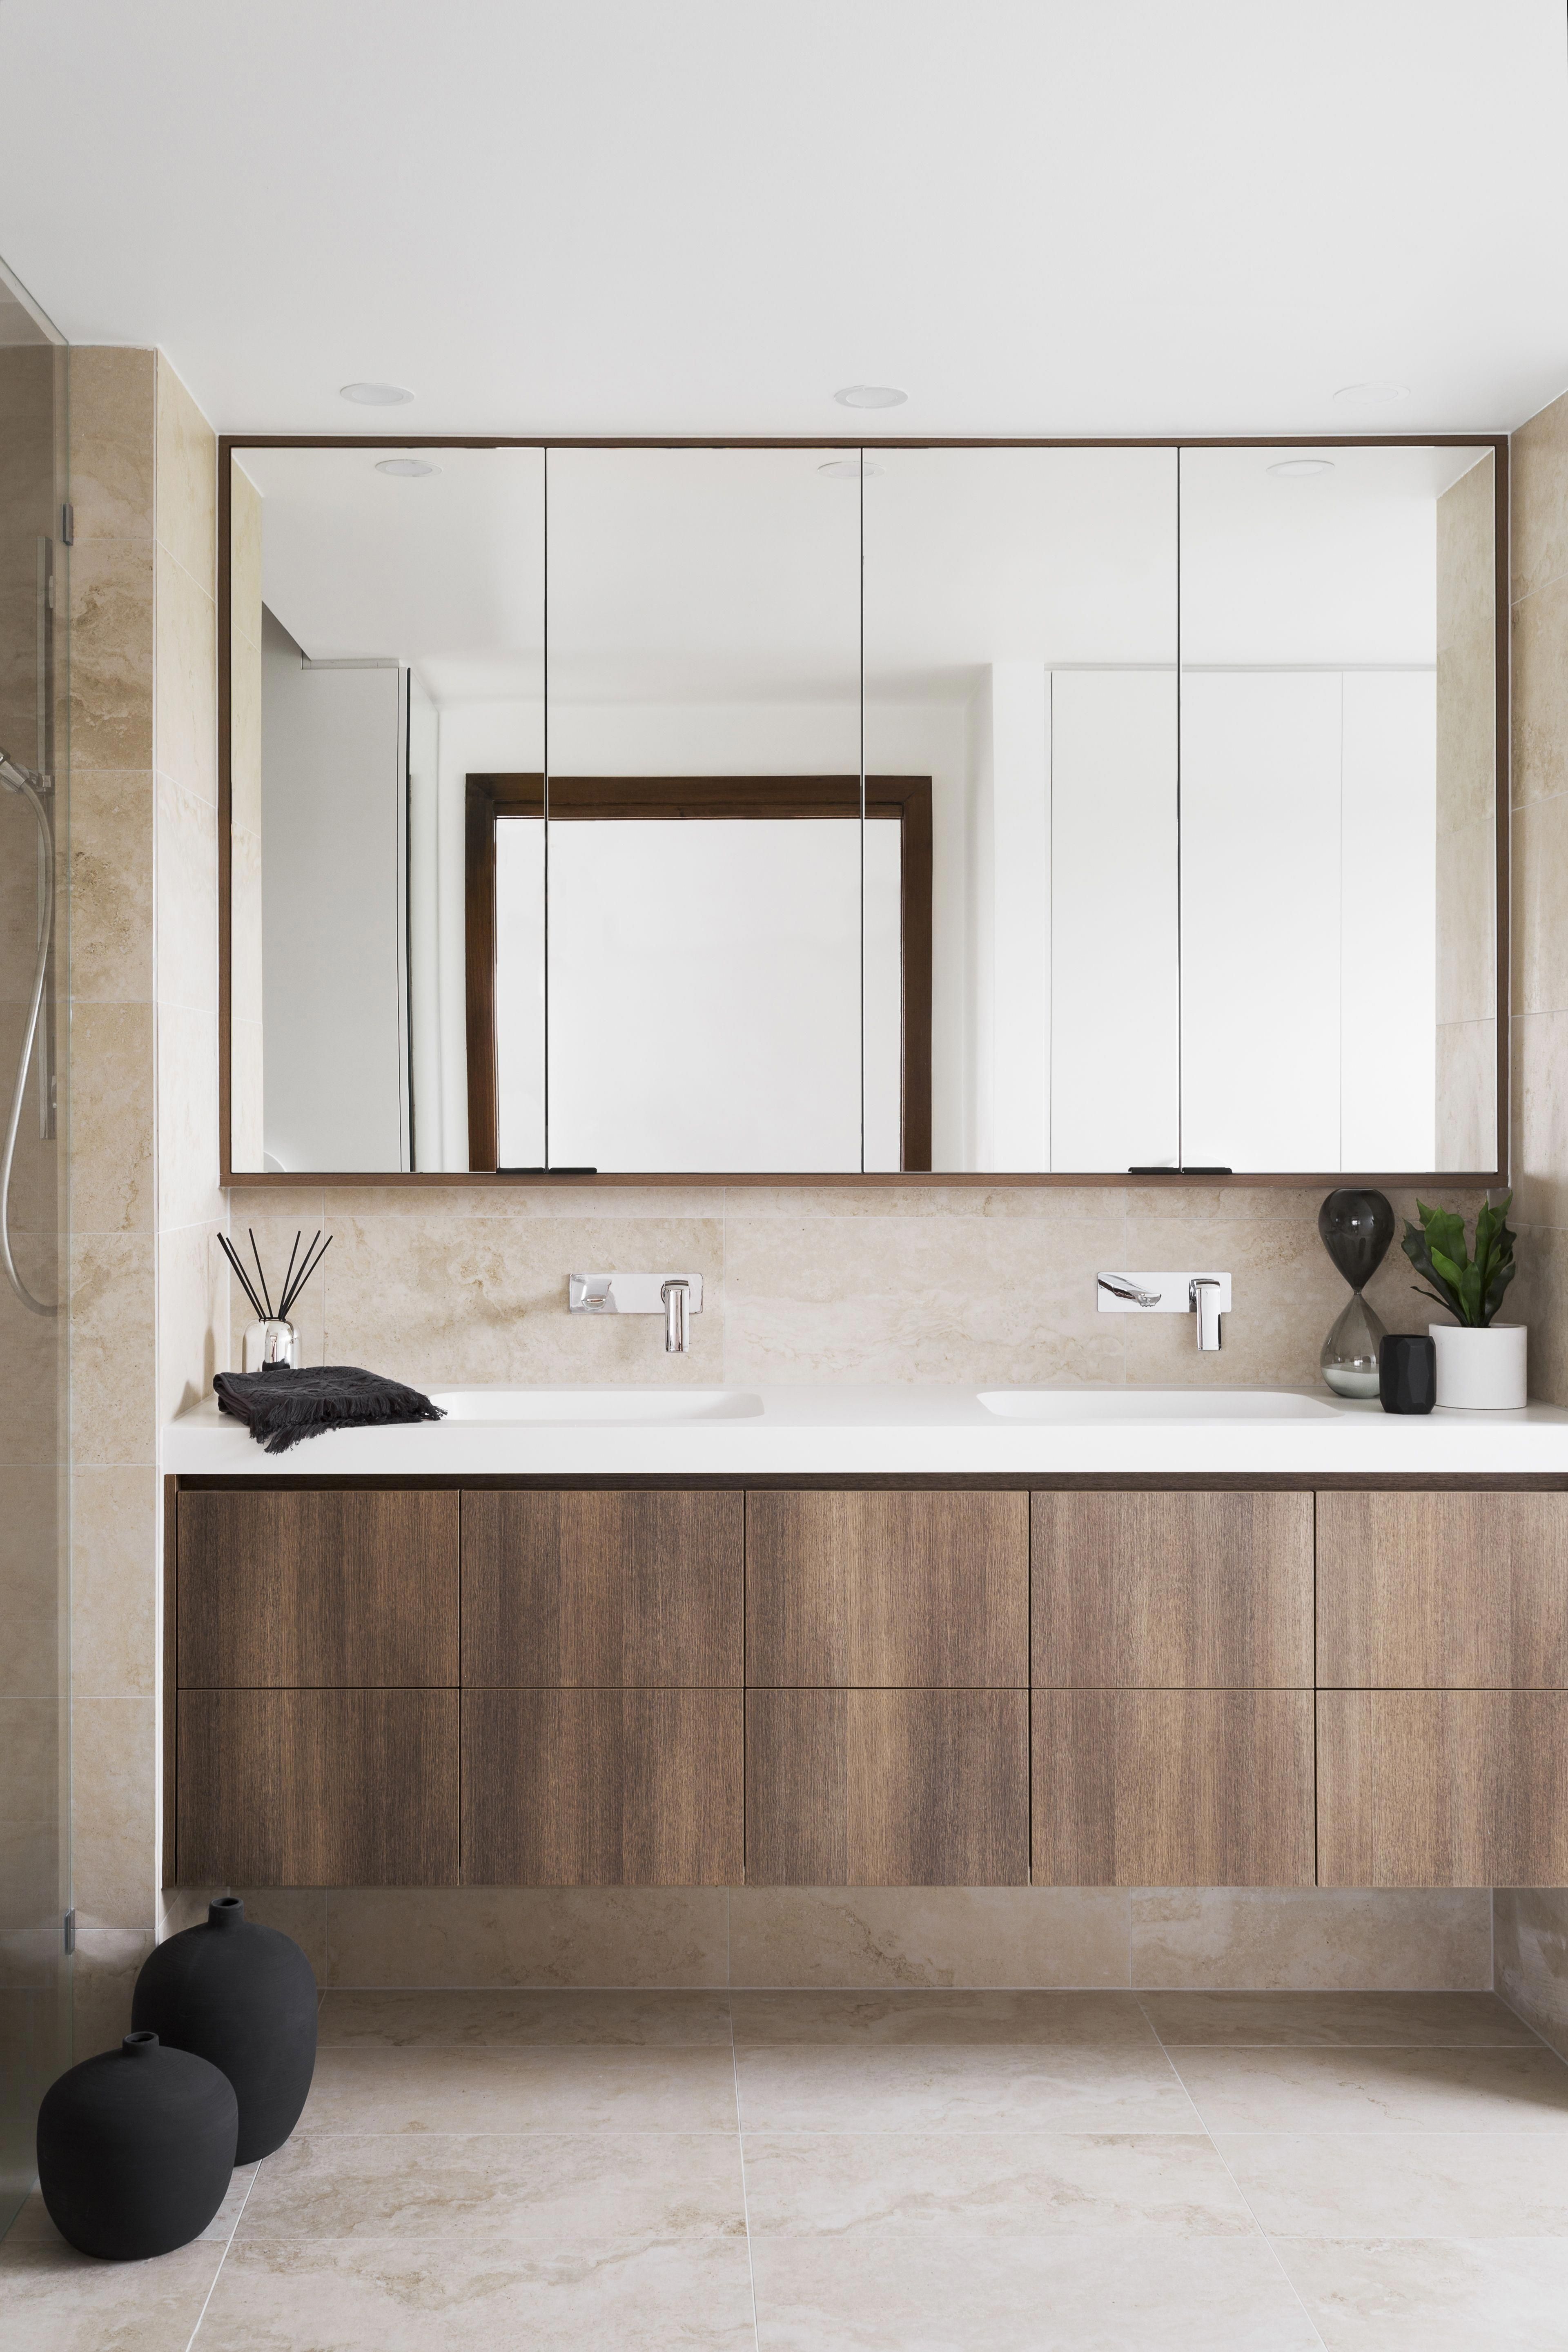 Photo 2 Of 8 In 6 Insider Tips For Bathroom Design From The Experts in proportions 3840 X 5760